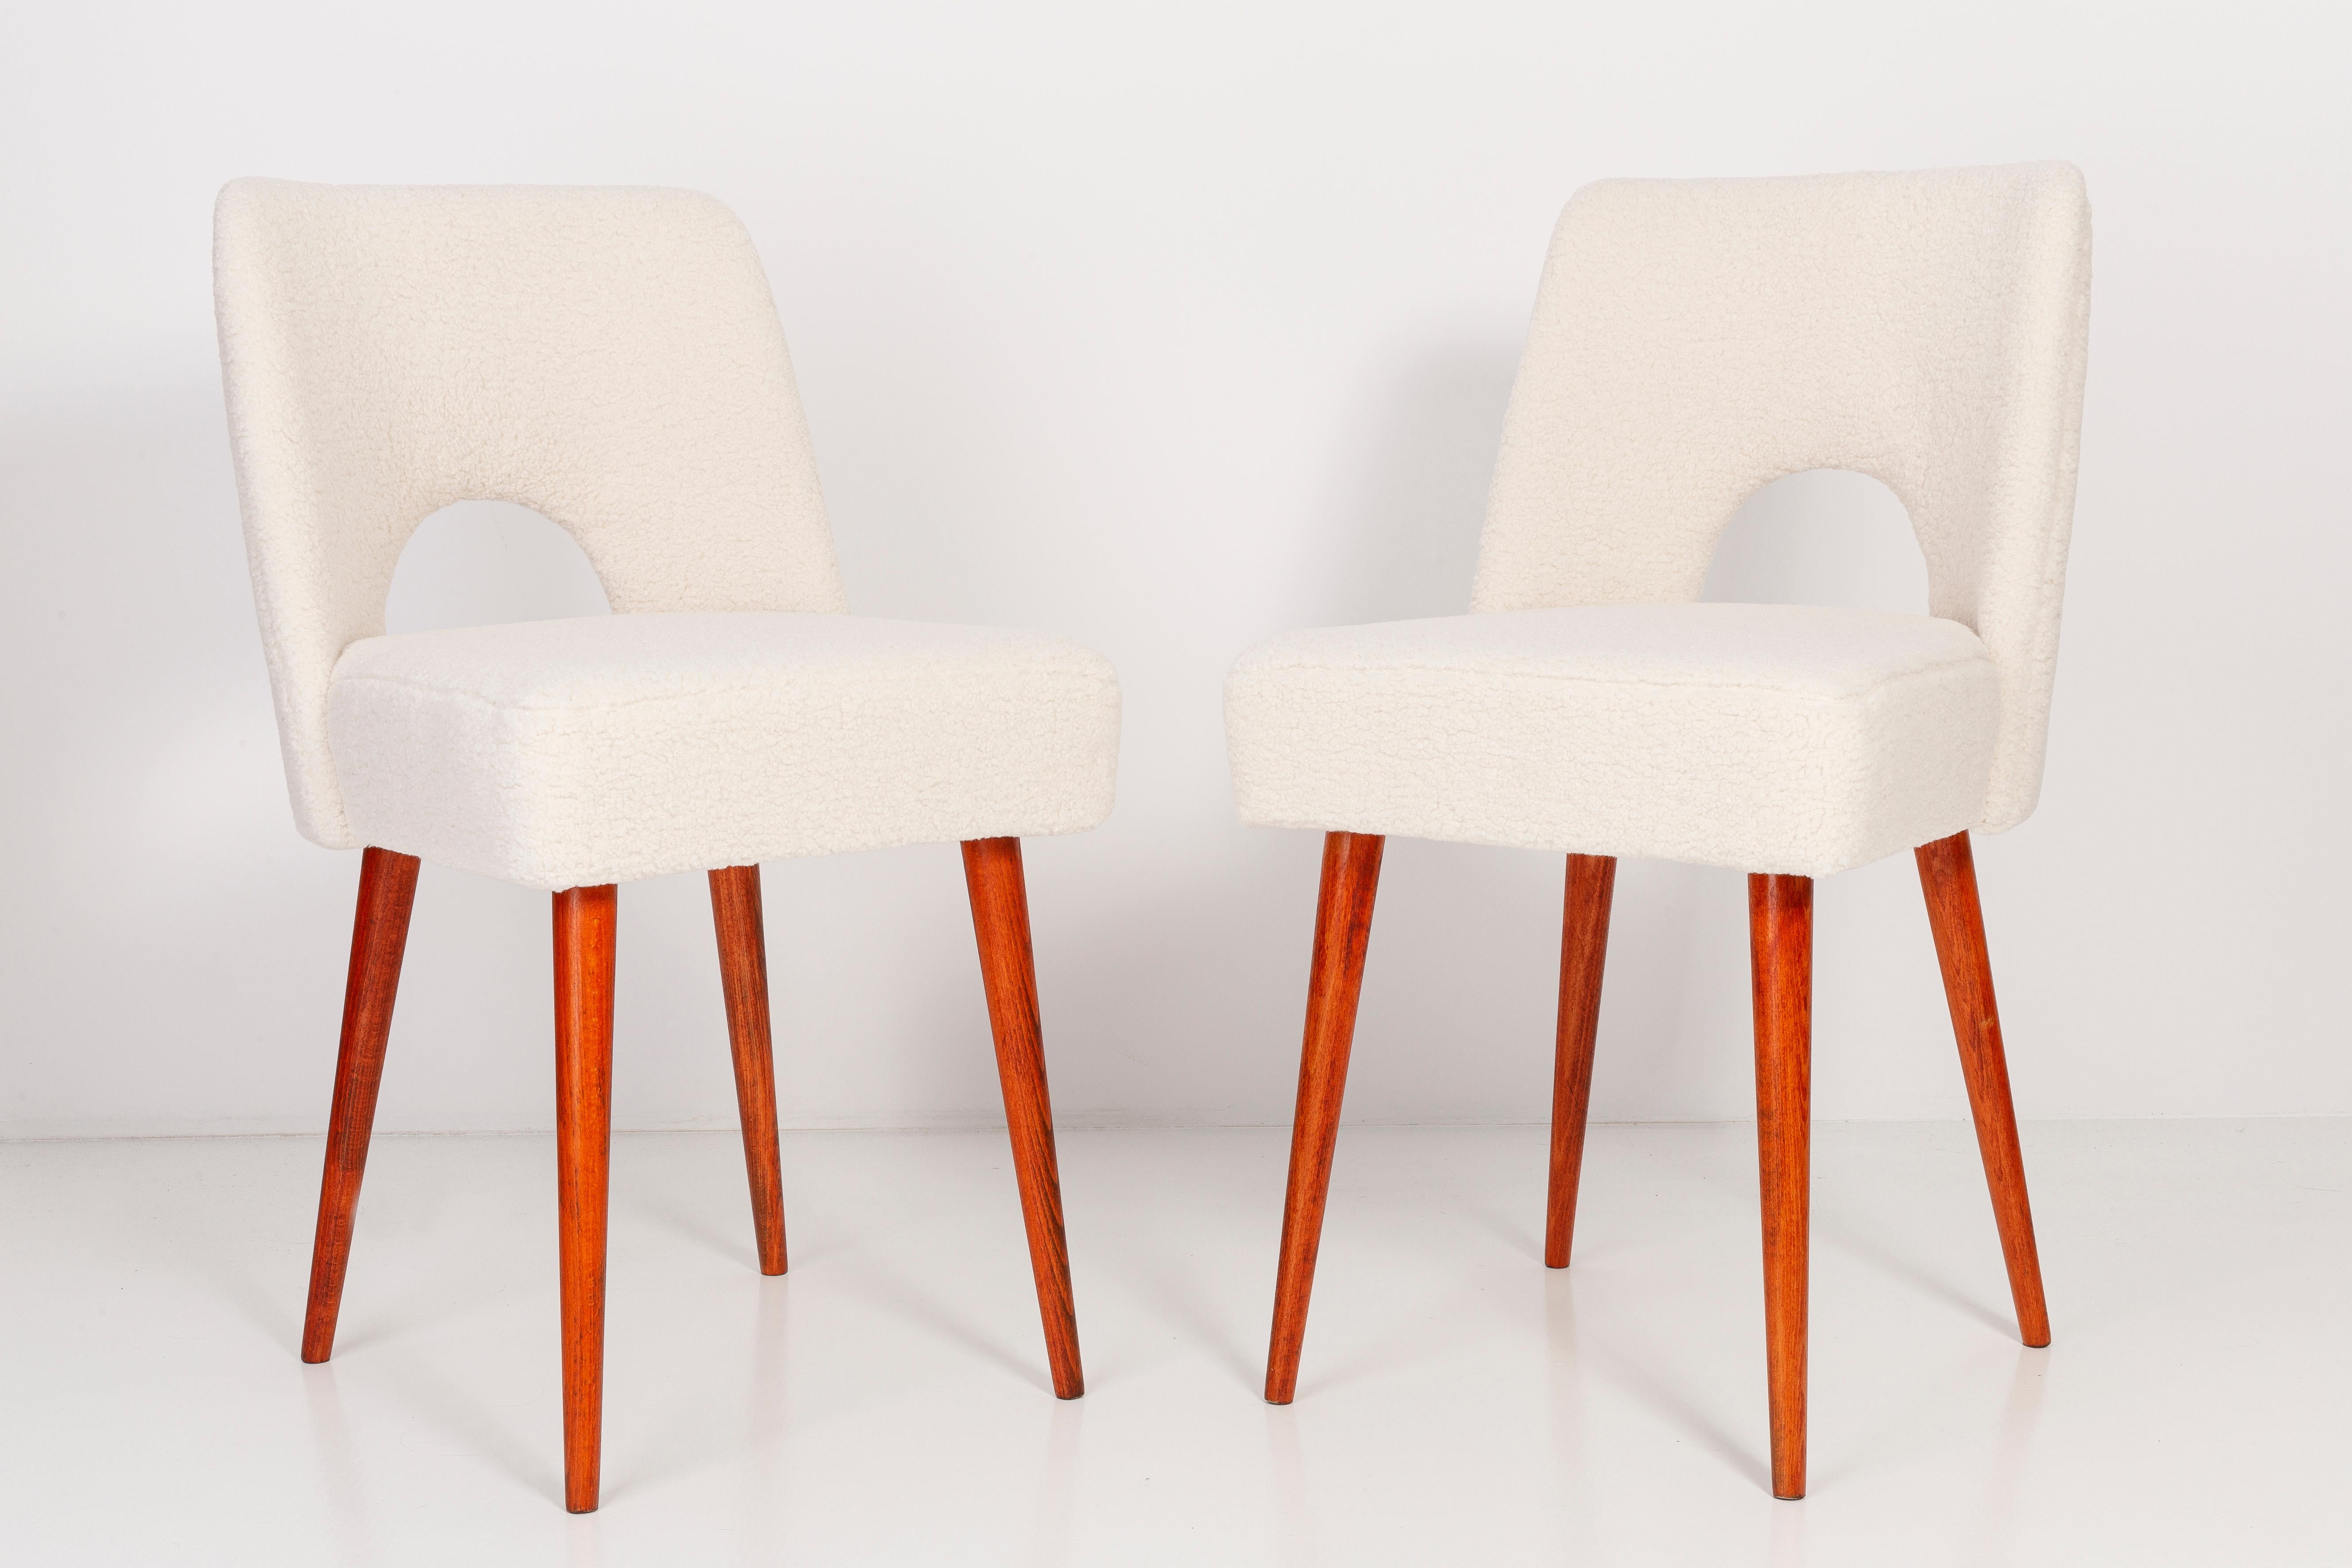 Four beautiful chairs type 1020 colloquially called 